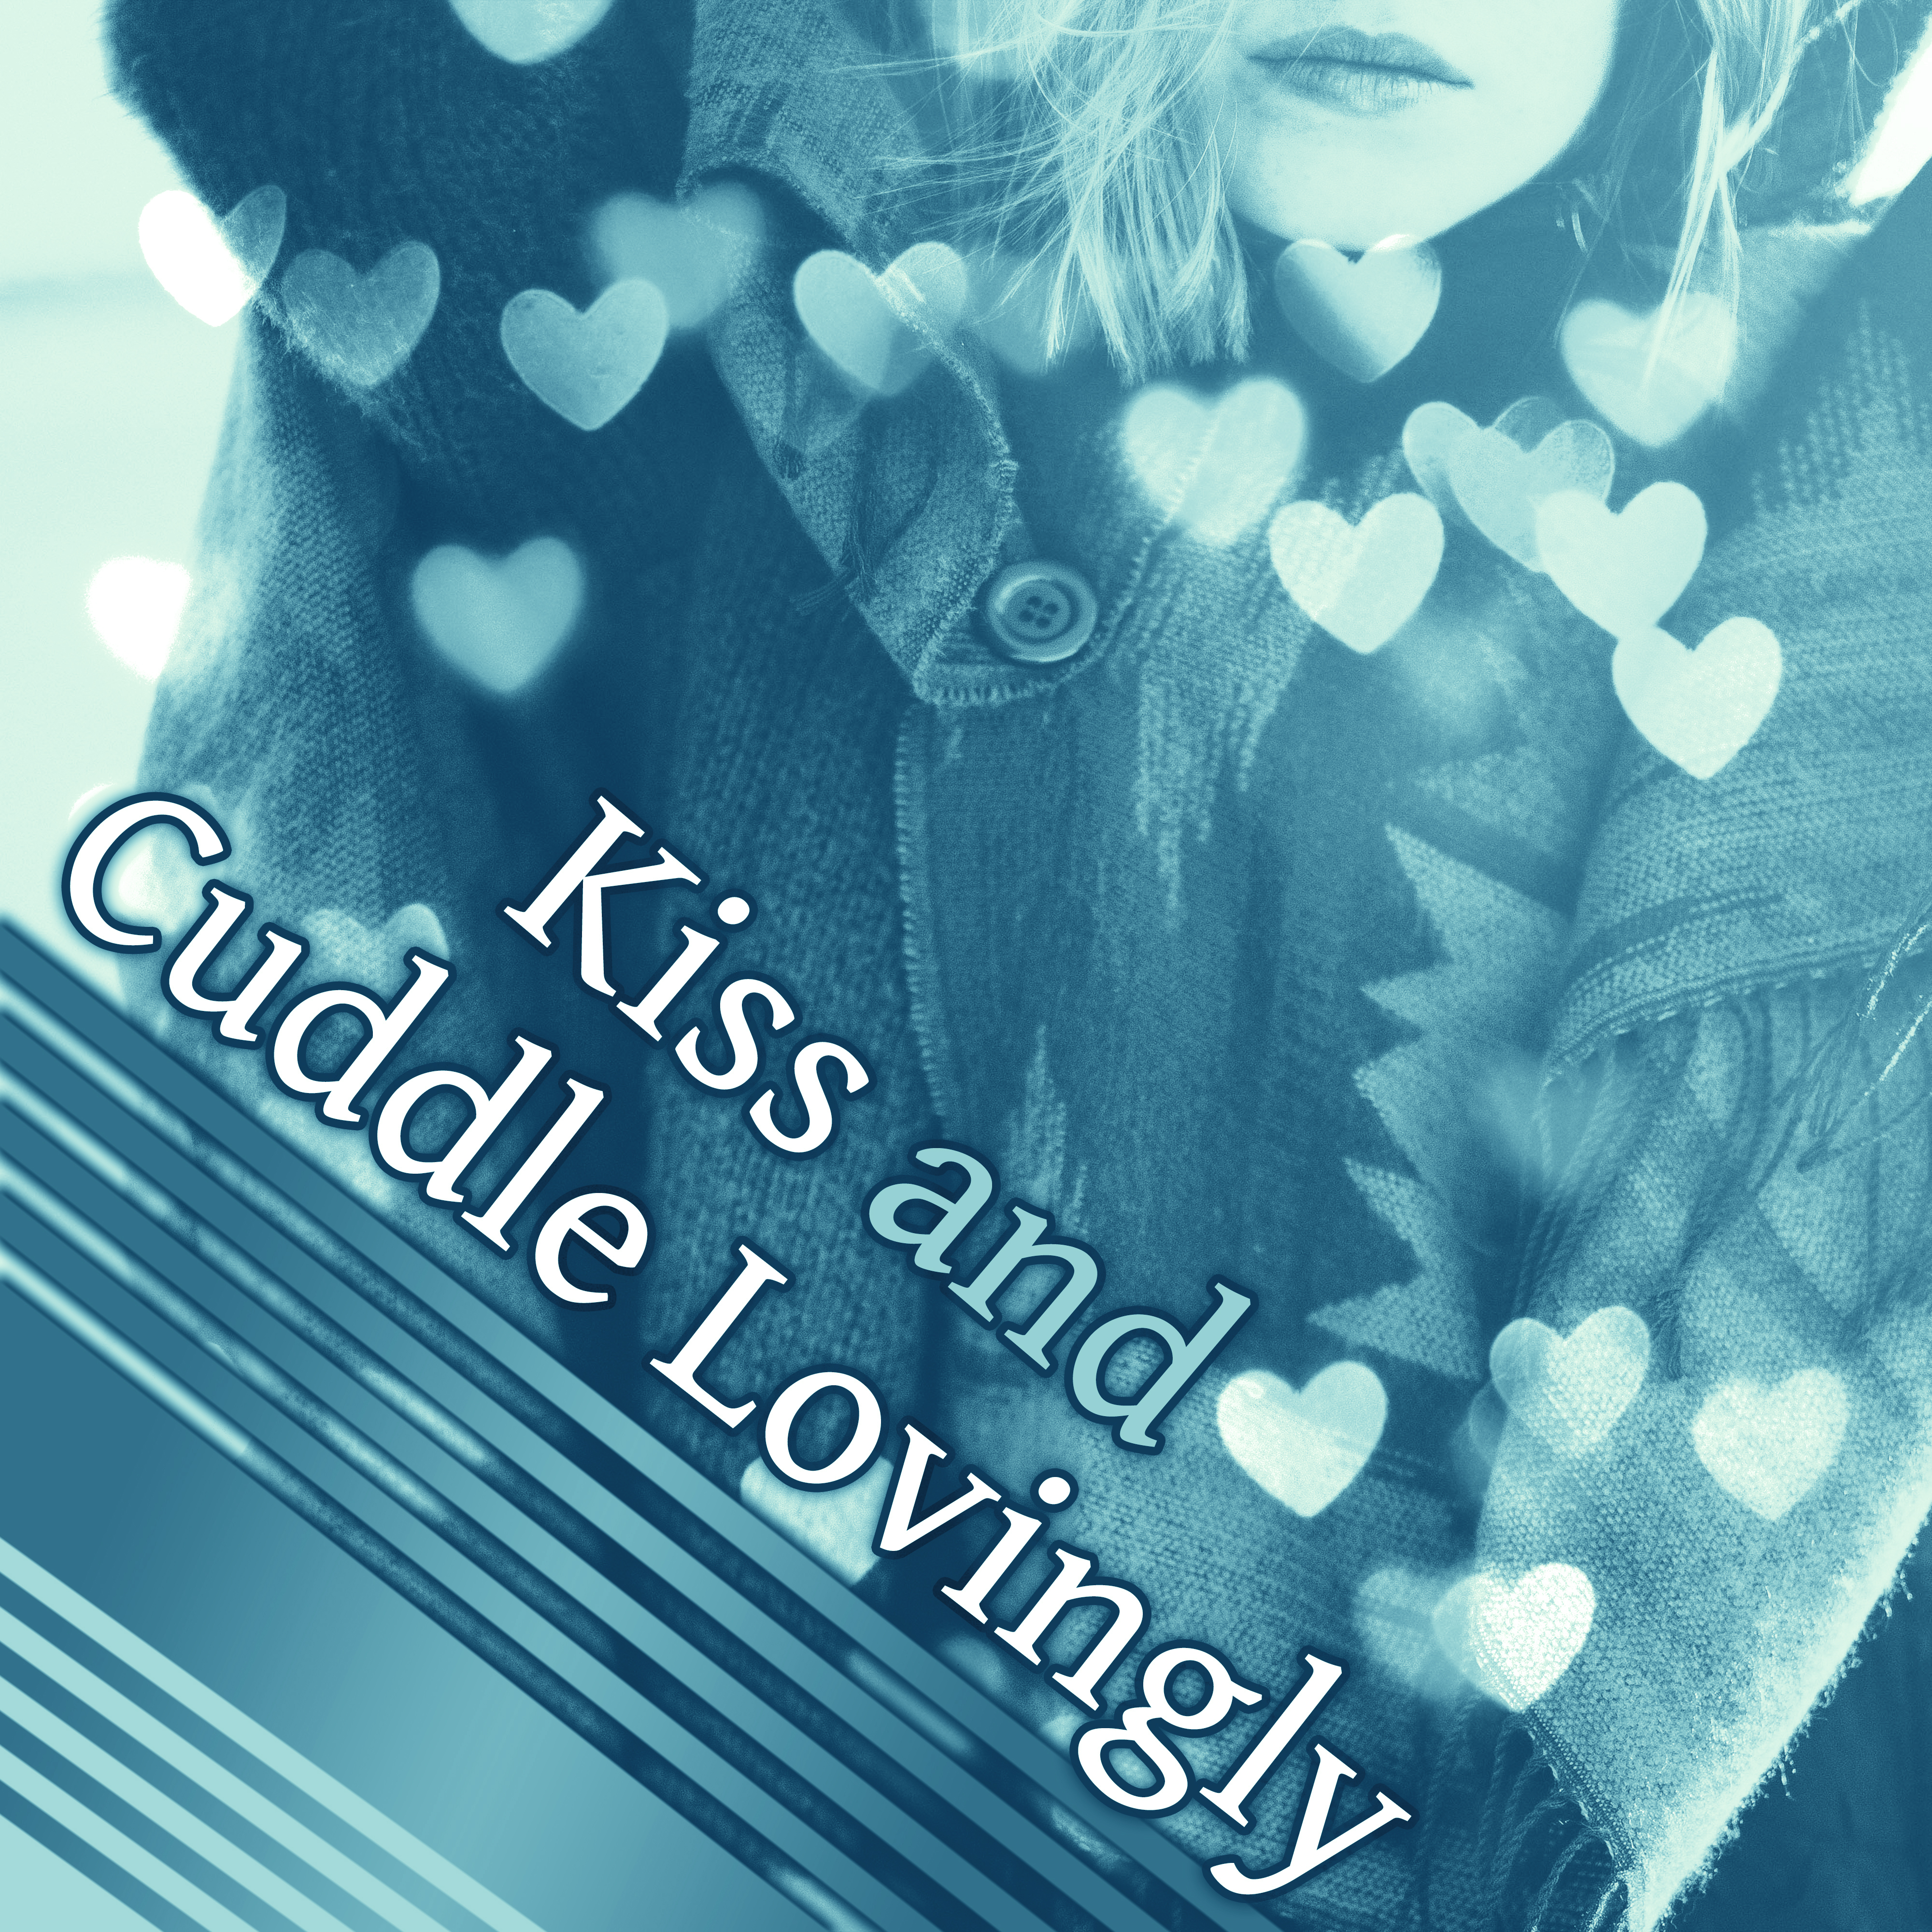 Kiss and Cuddle Lovingly - True Love, Strong Feeling, Largest World Power, Desire to Love, Feeling that Warms